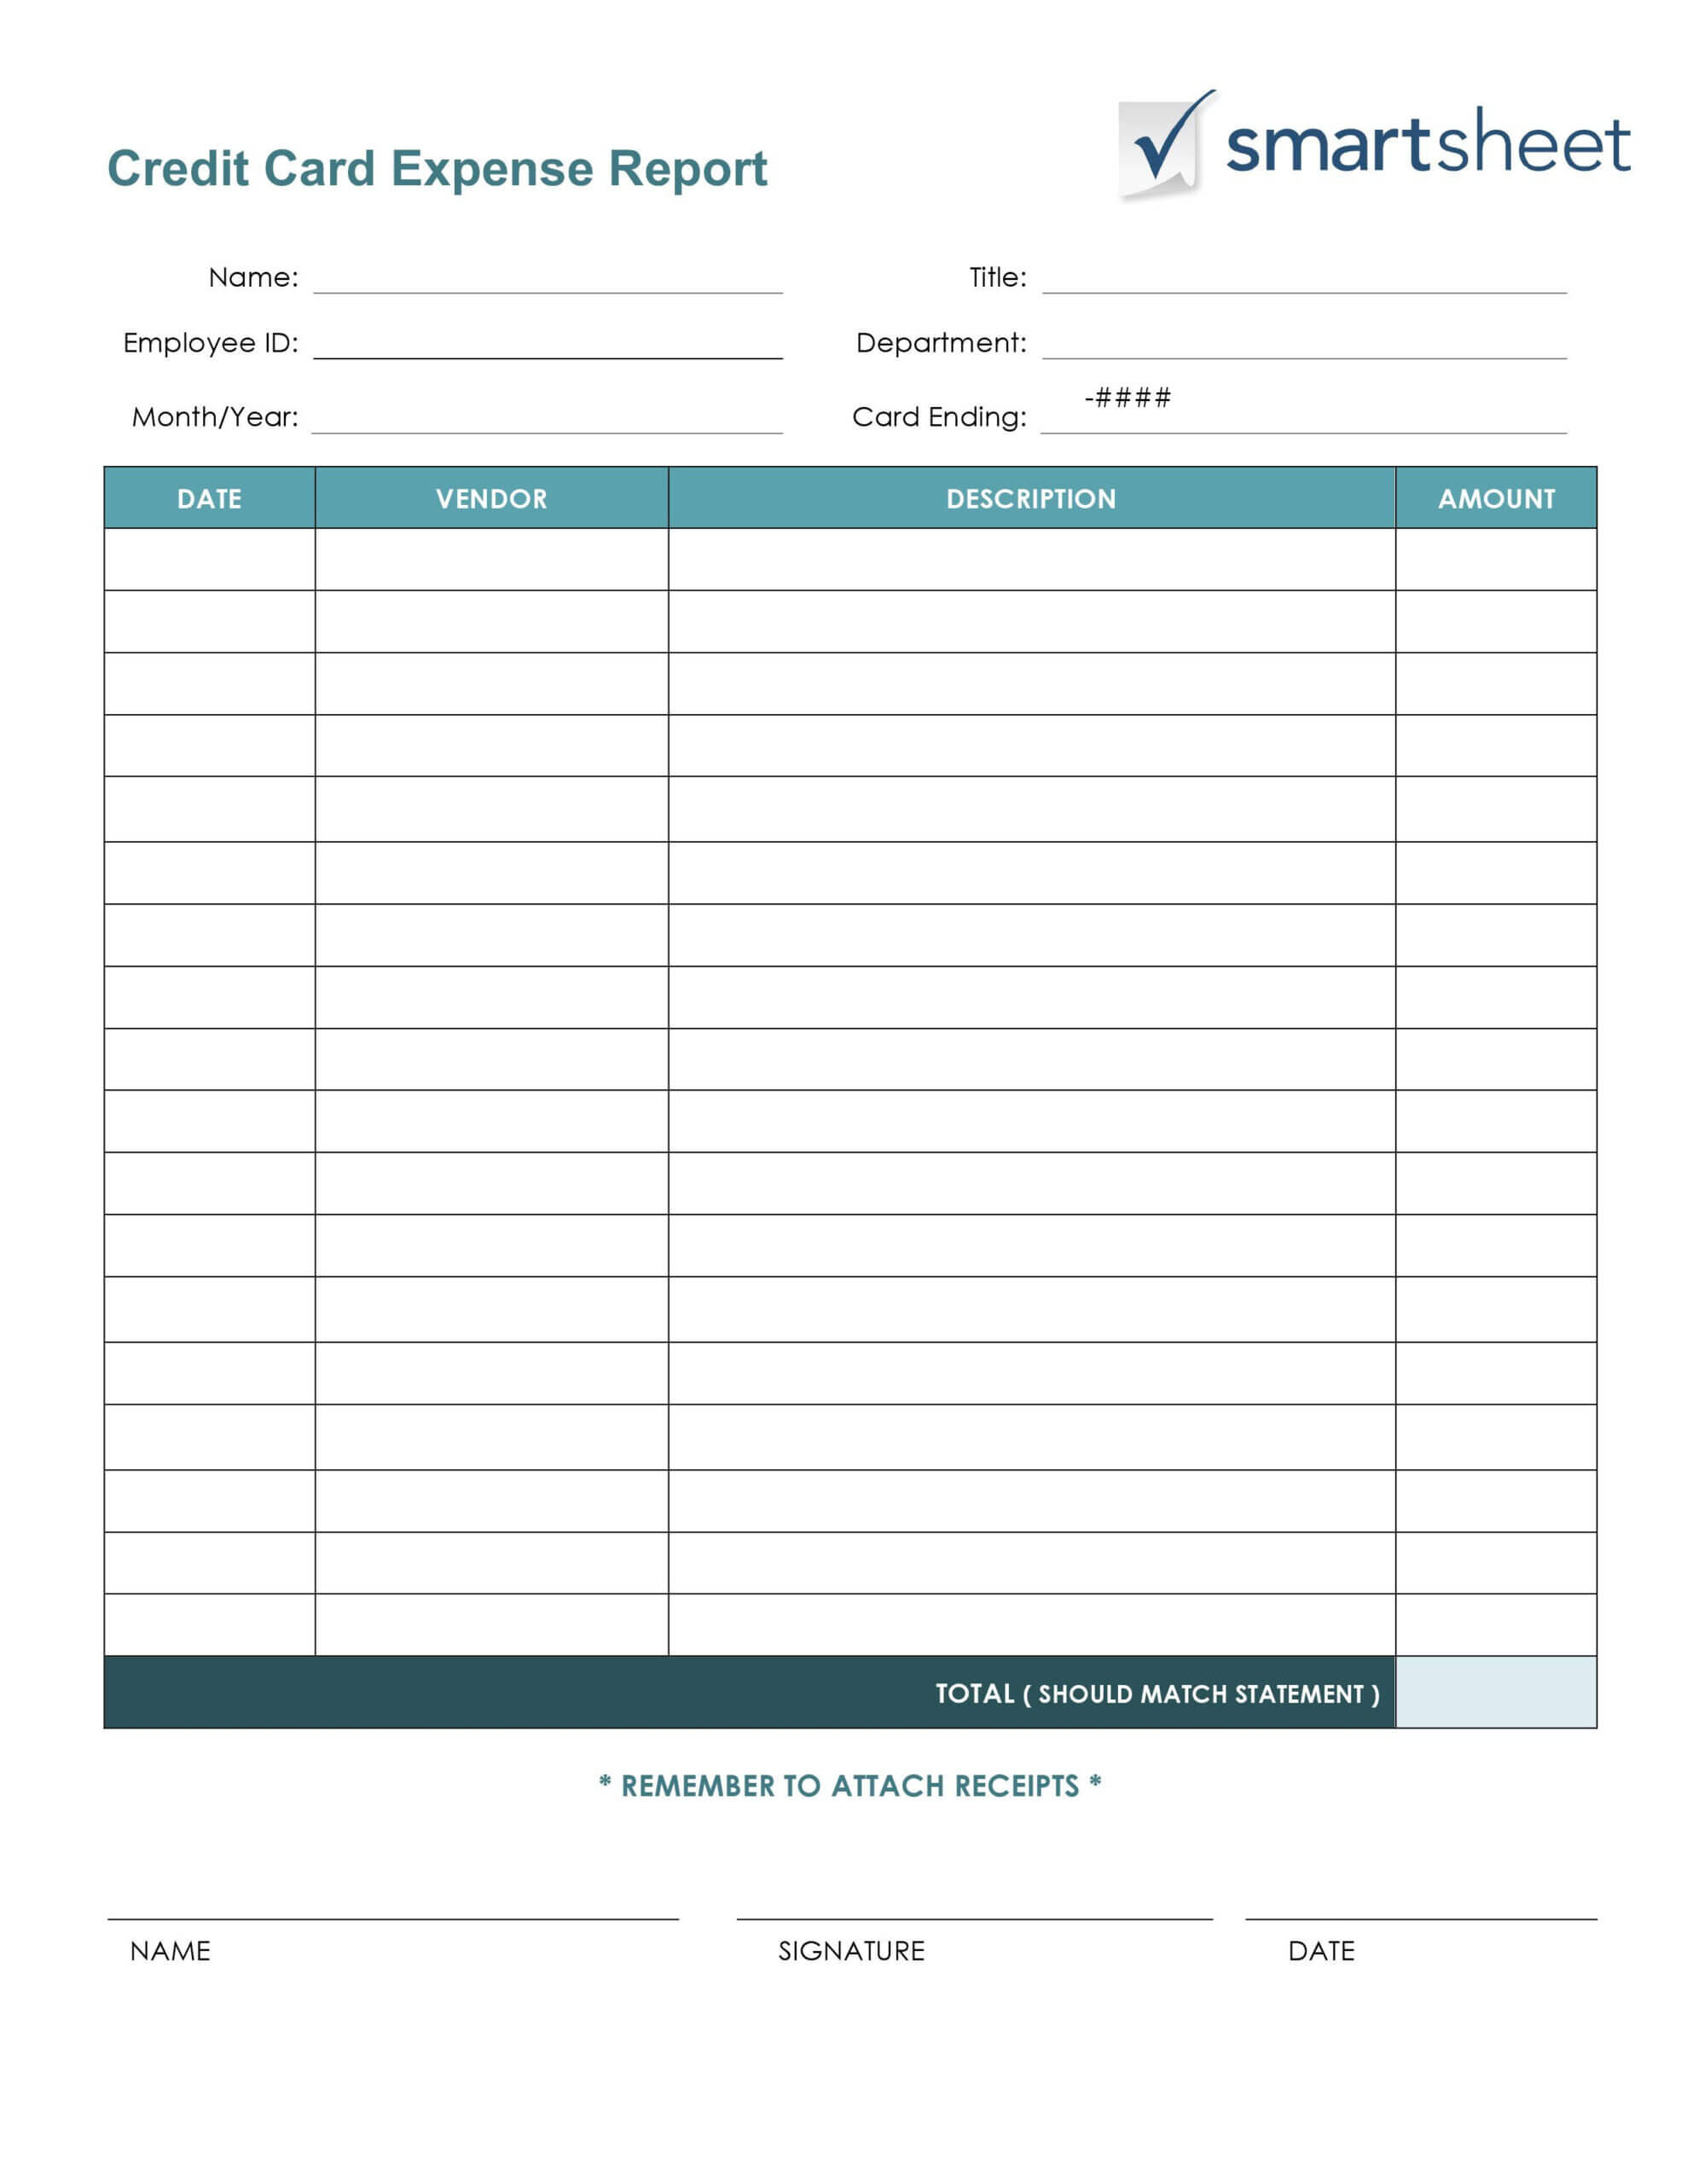 Employee Expense Report Template | 11+ Free Docs, Xlsx & Pdf Throughout Expense Report Template Xls